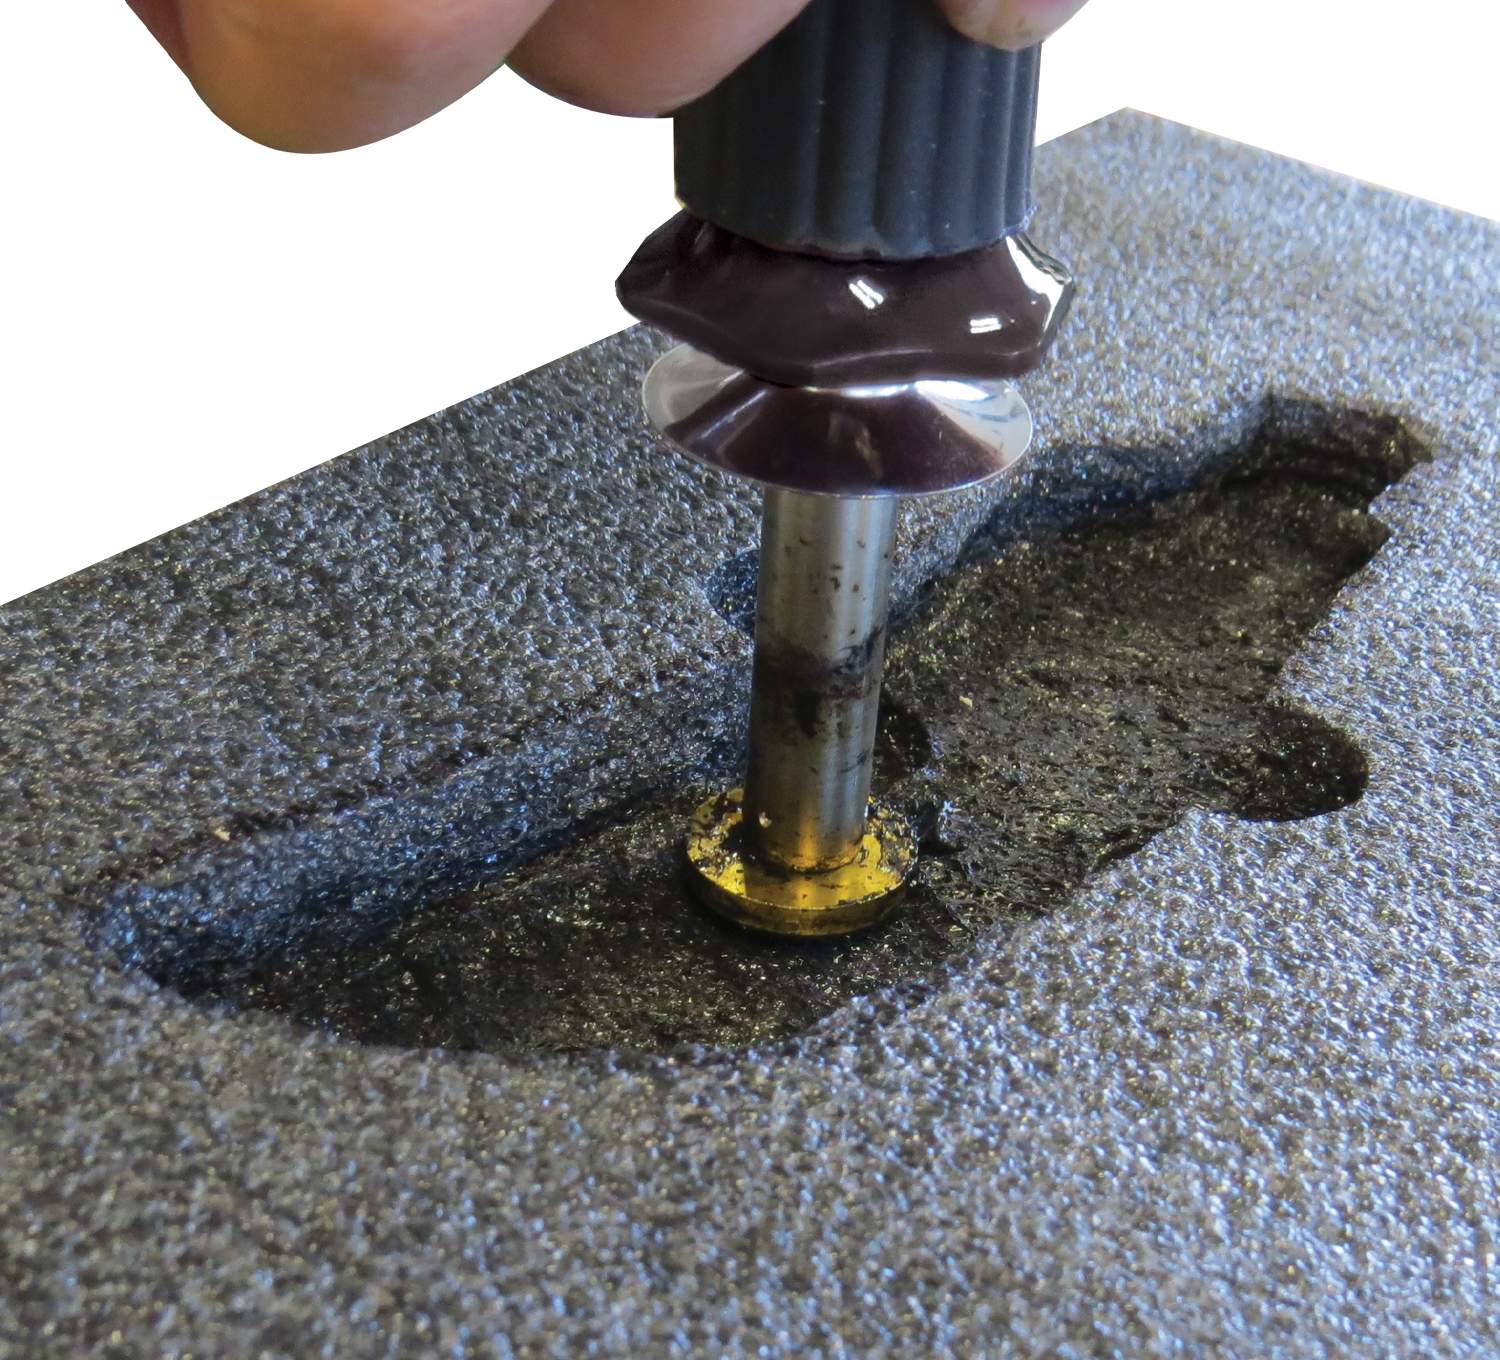 New FastCap Tools for Smoothing and Cutting Kaizen Foam